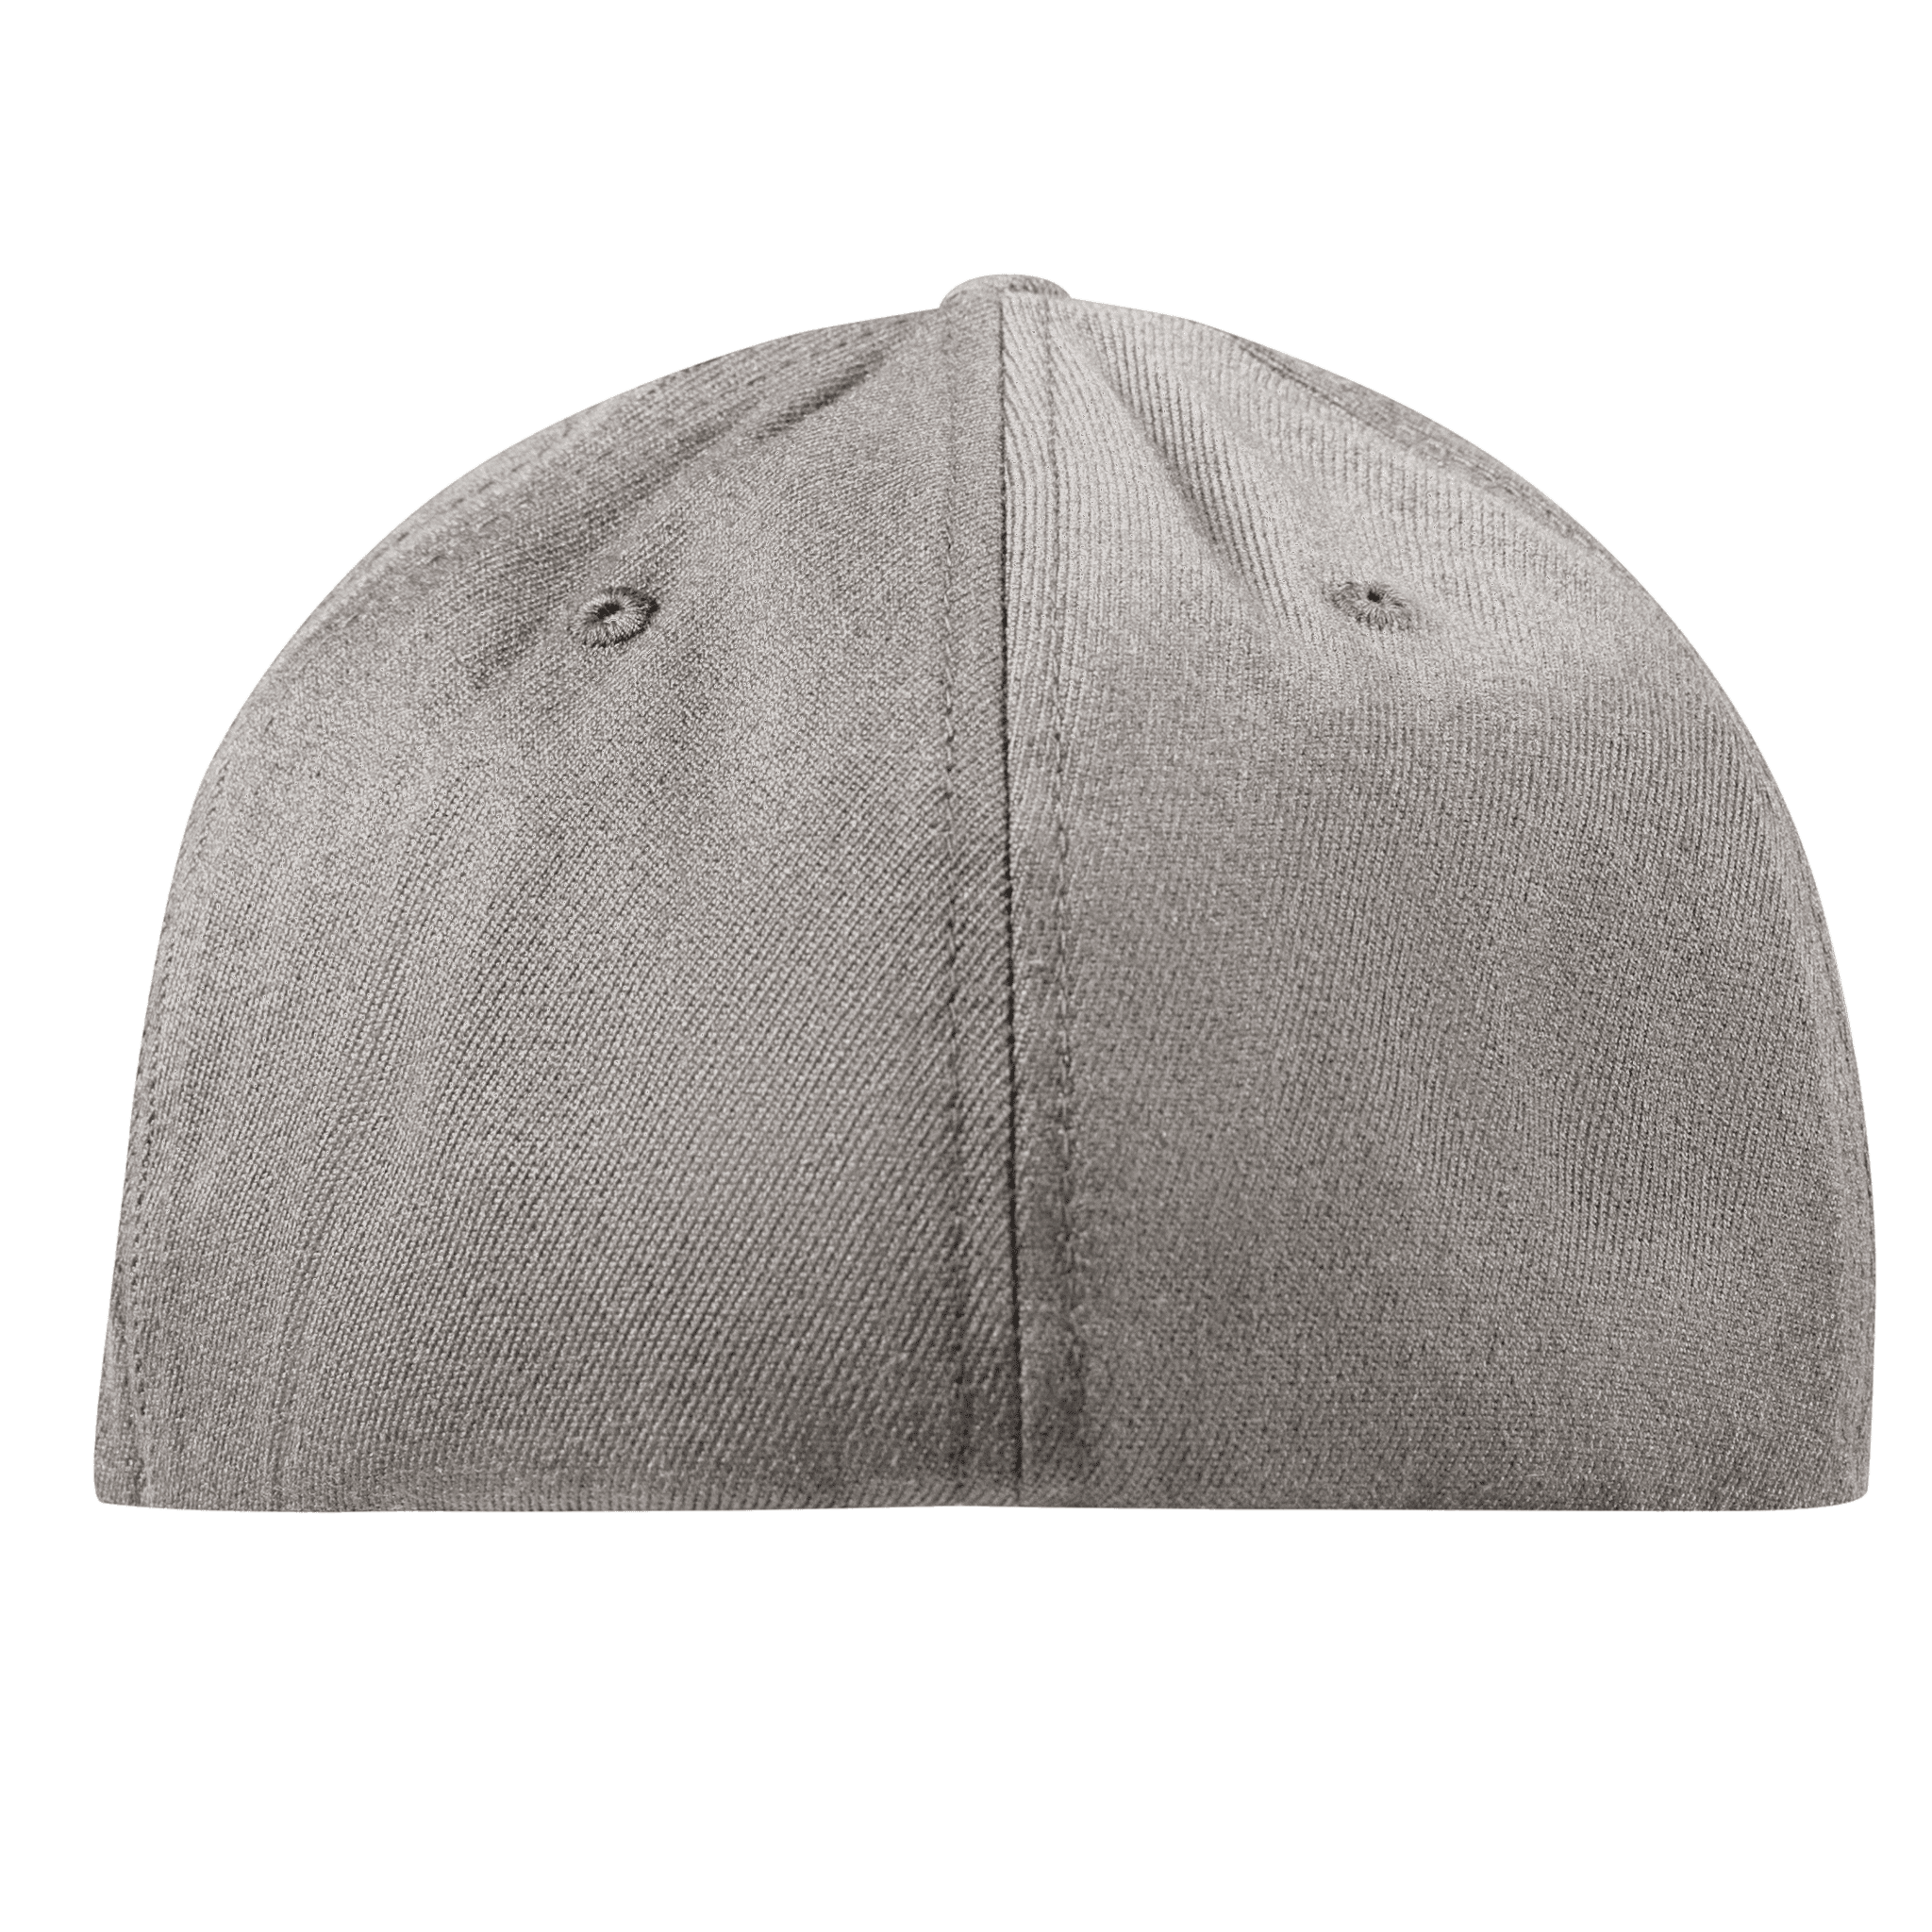 Wisconsin Patriot Flexfit Fitted Back Heather Grey